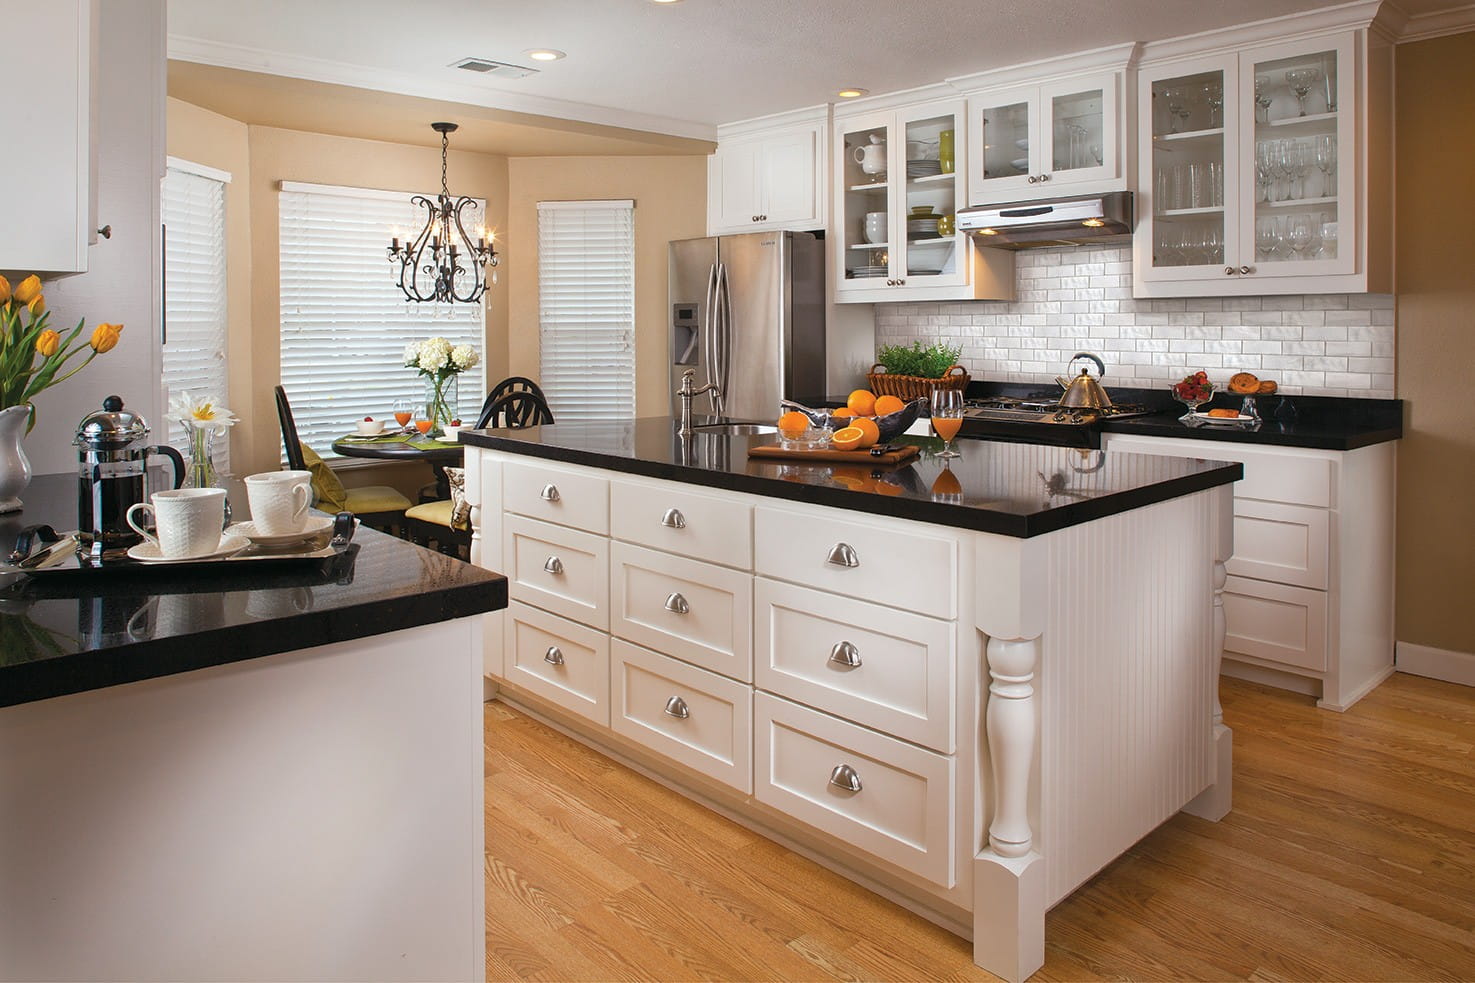 a beautiful galley kitchen with a centralised island, having cabinets and its countertop has a black marble finish, the cabinets are white, the island countertop has a built-in sink, it is a storage efficient kitchen with above cabinets too, seating arrangement with a table and chairs, chandelier installed above the seating area